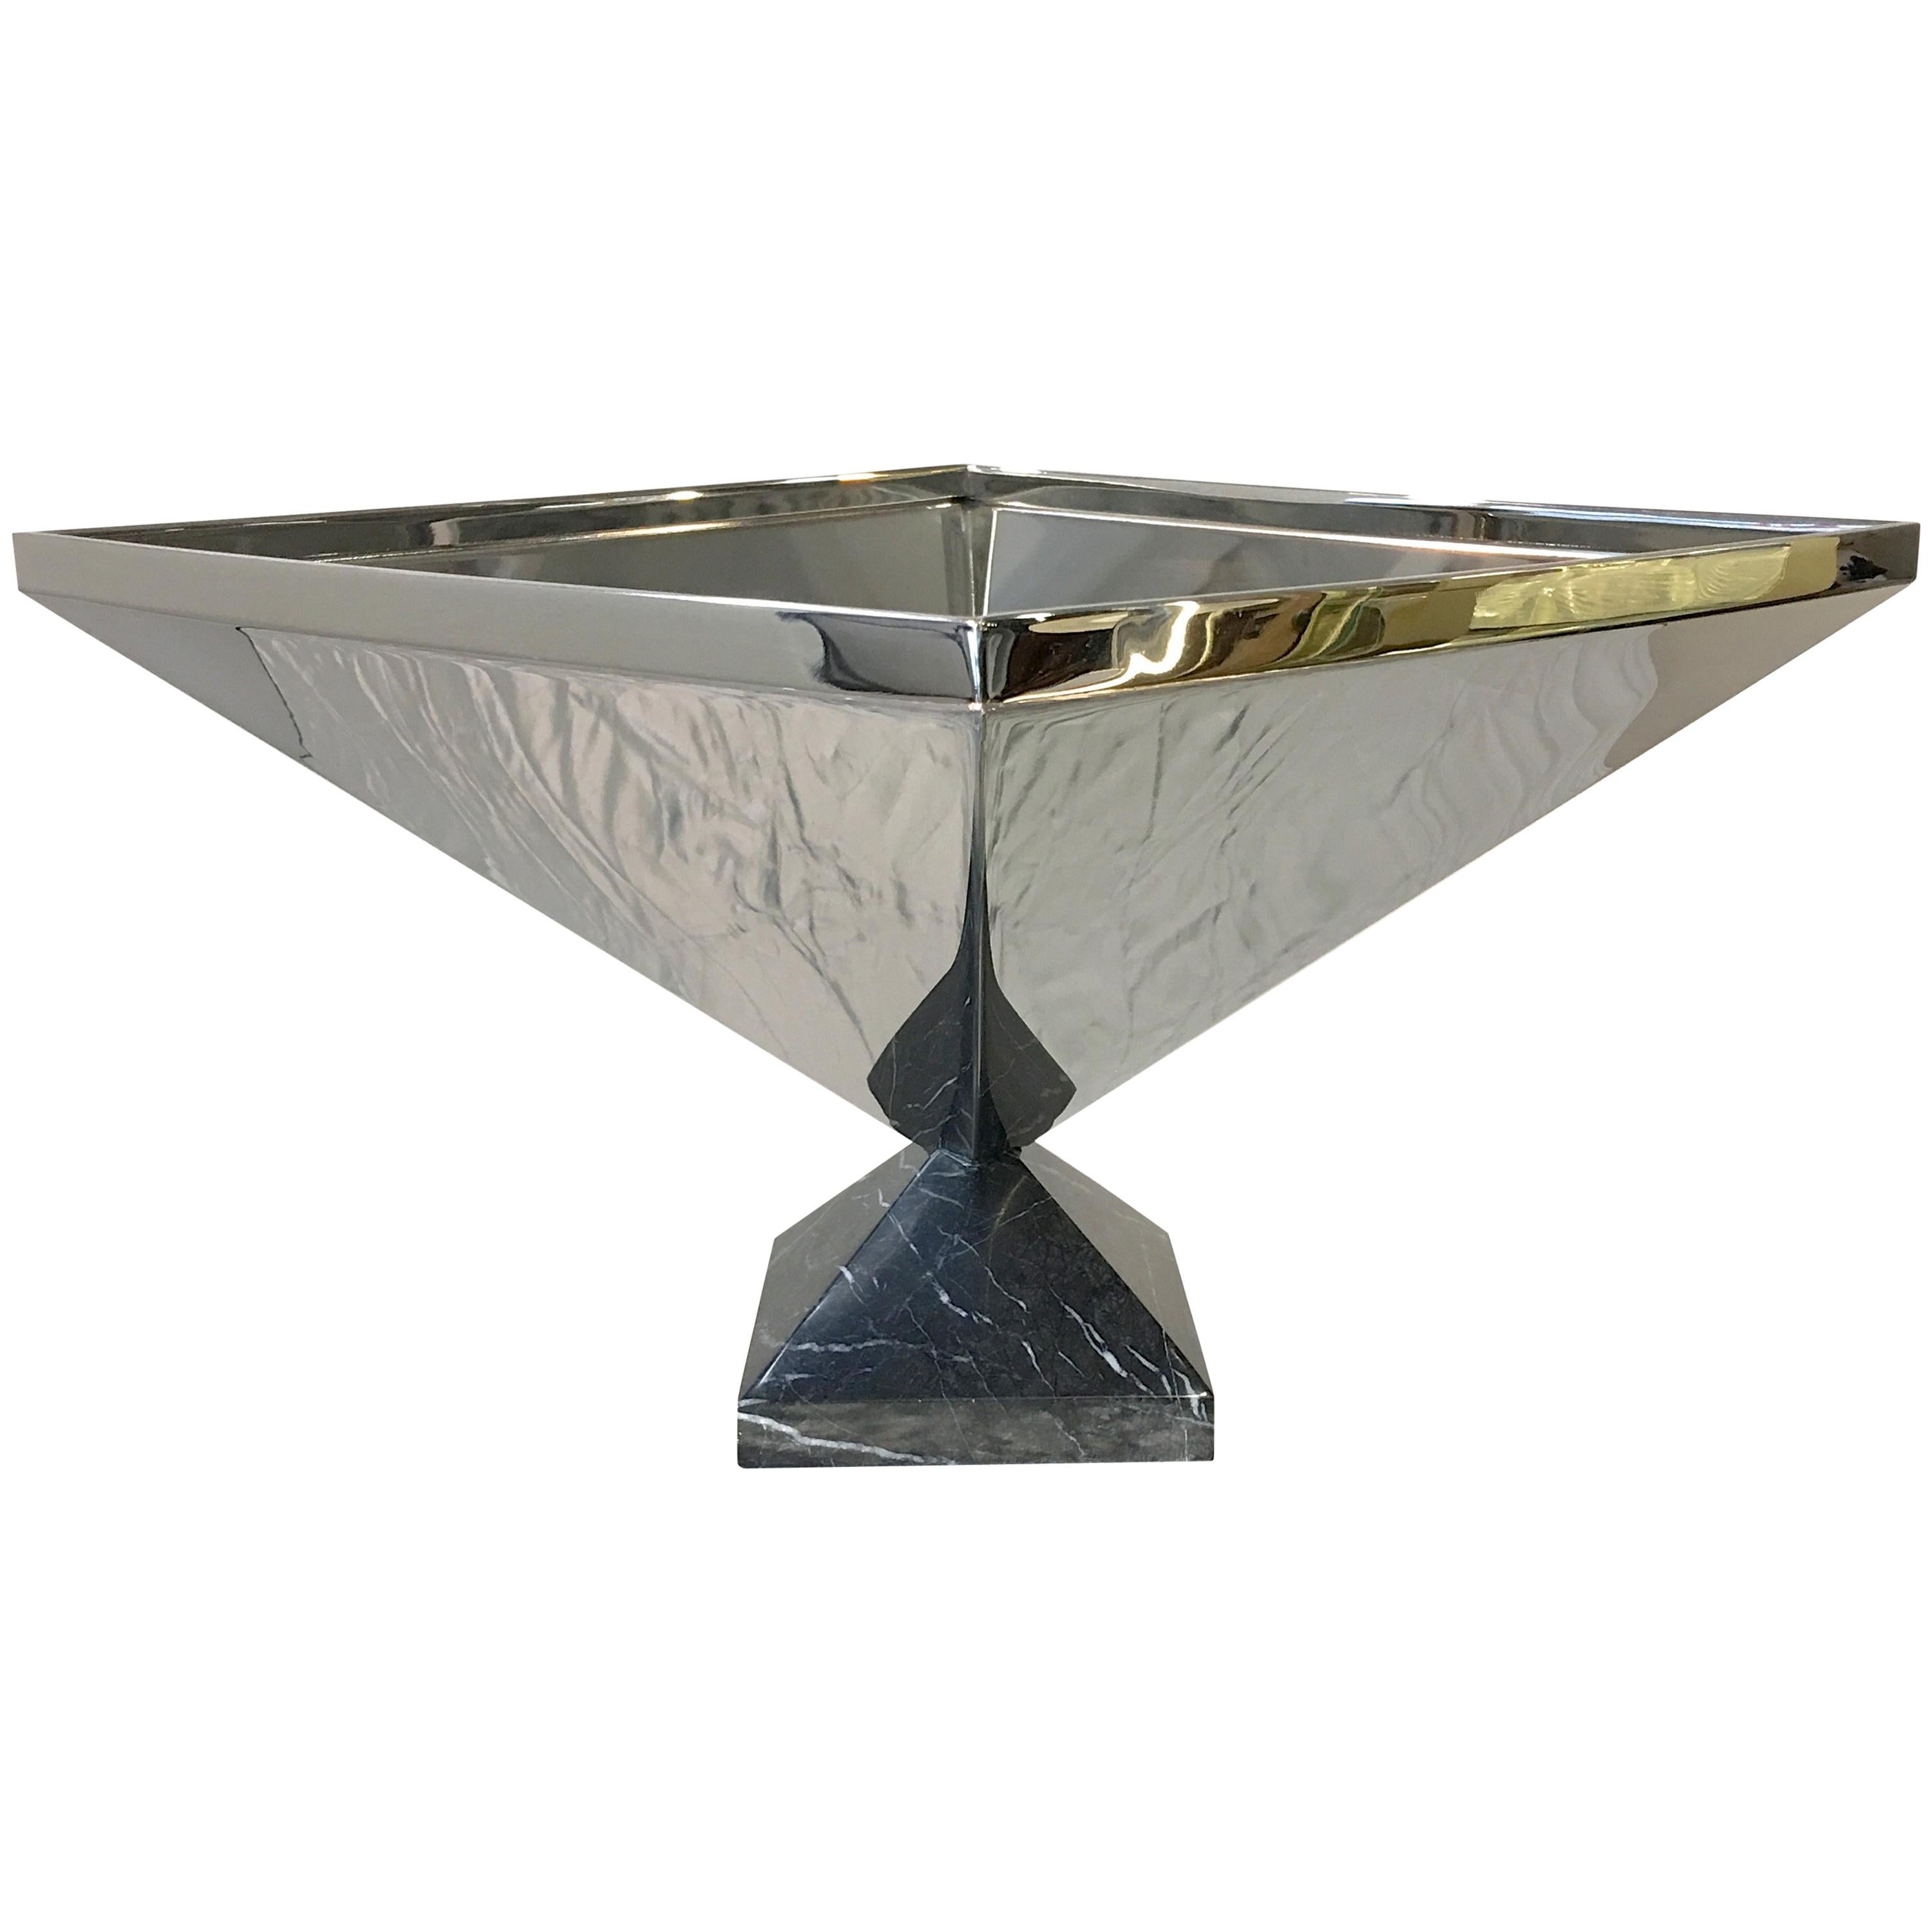 Inverted Pyramid Polished Stainless Centerpiece on Marble Pyramid Base